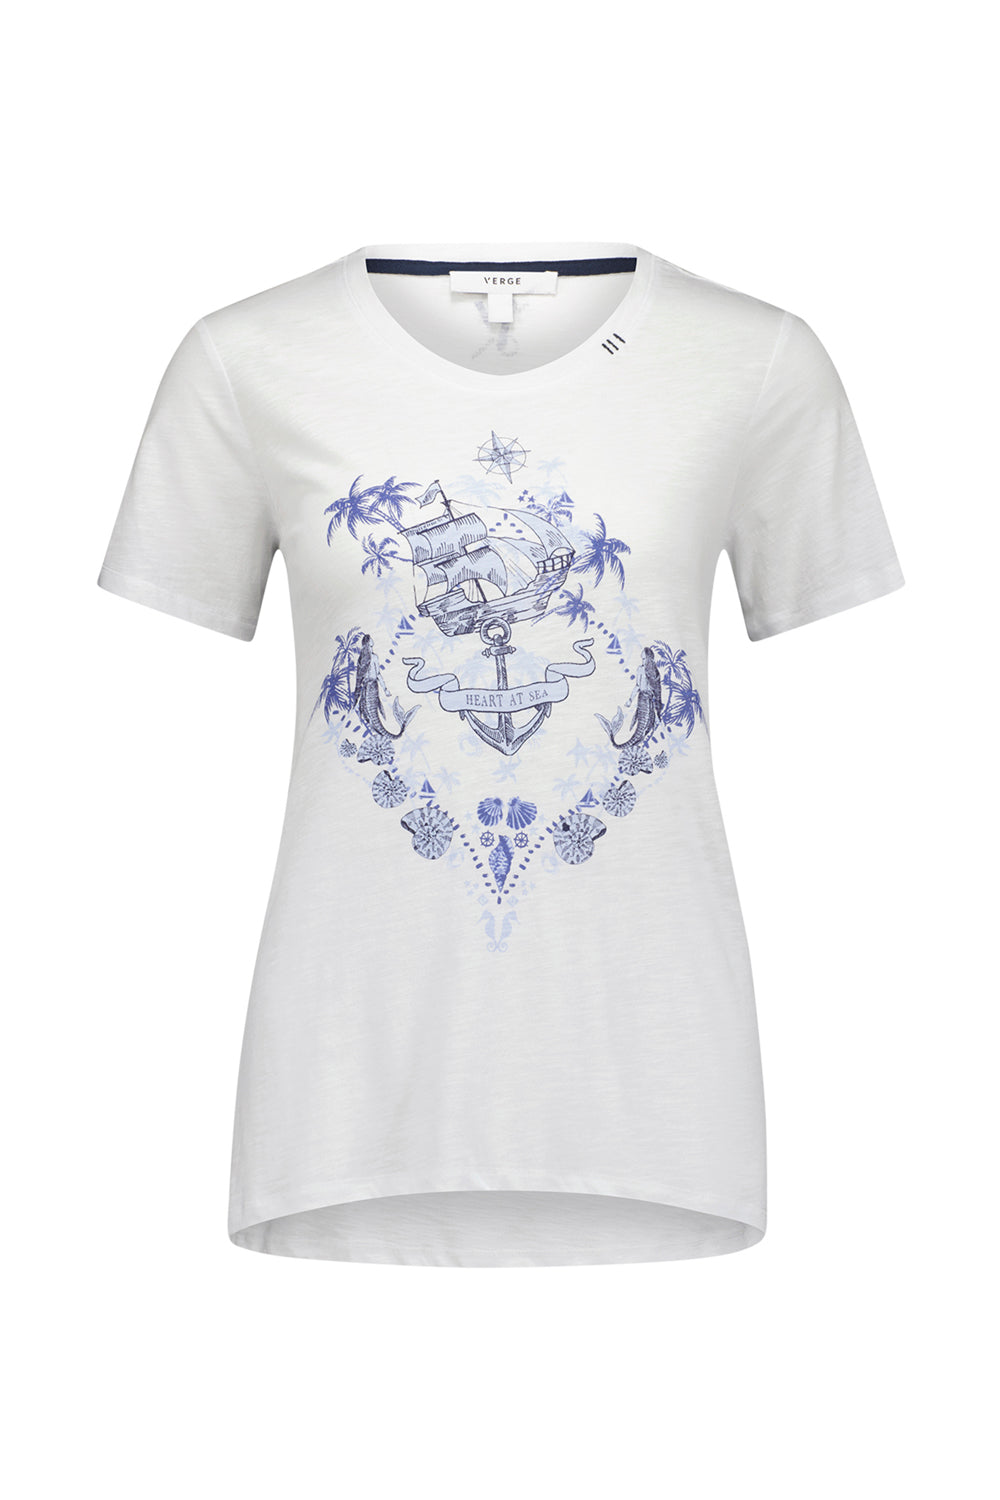 Heart At Sea Top - White - VERGE